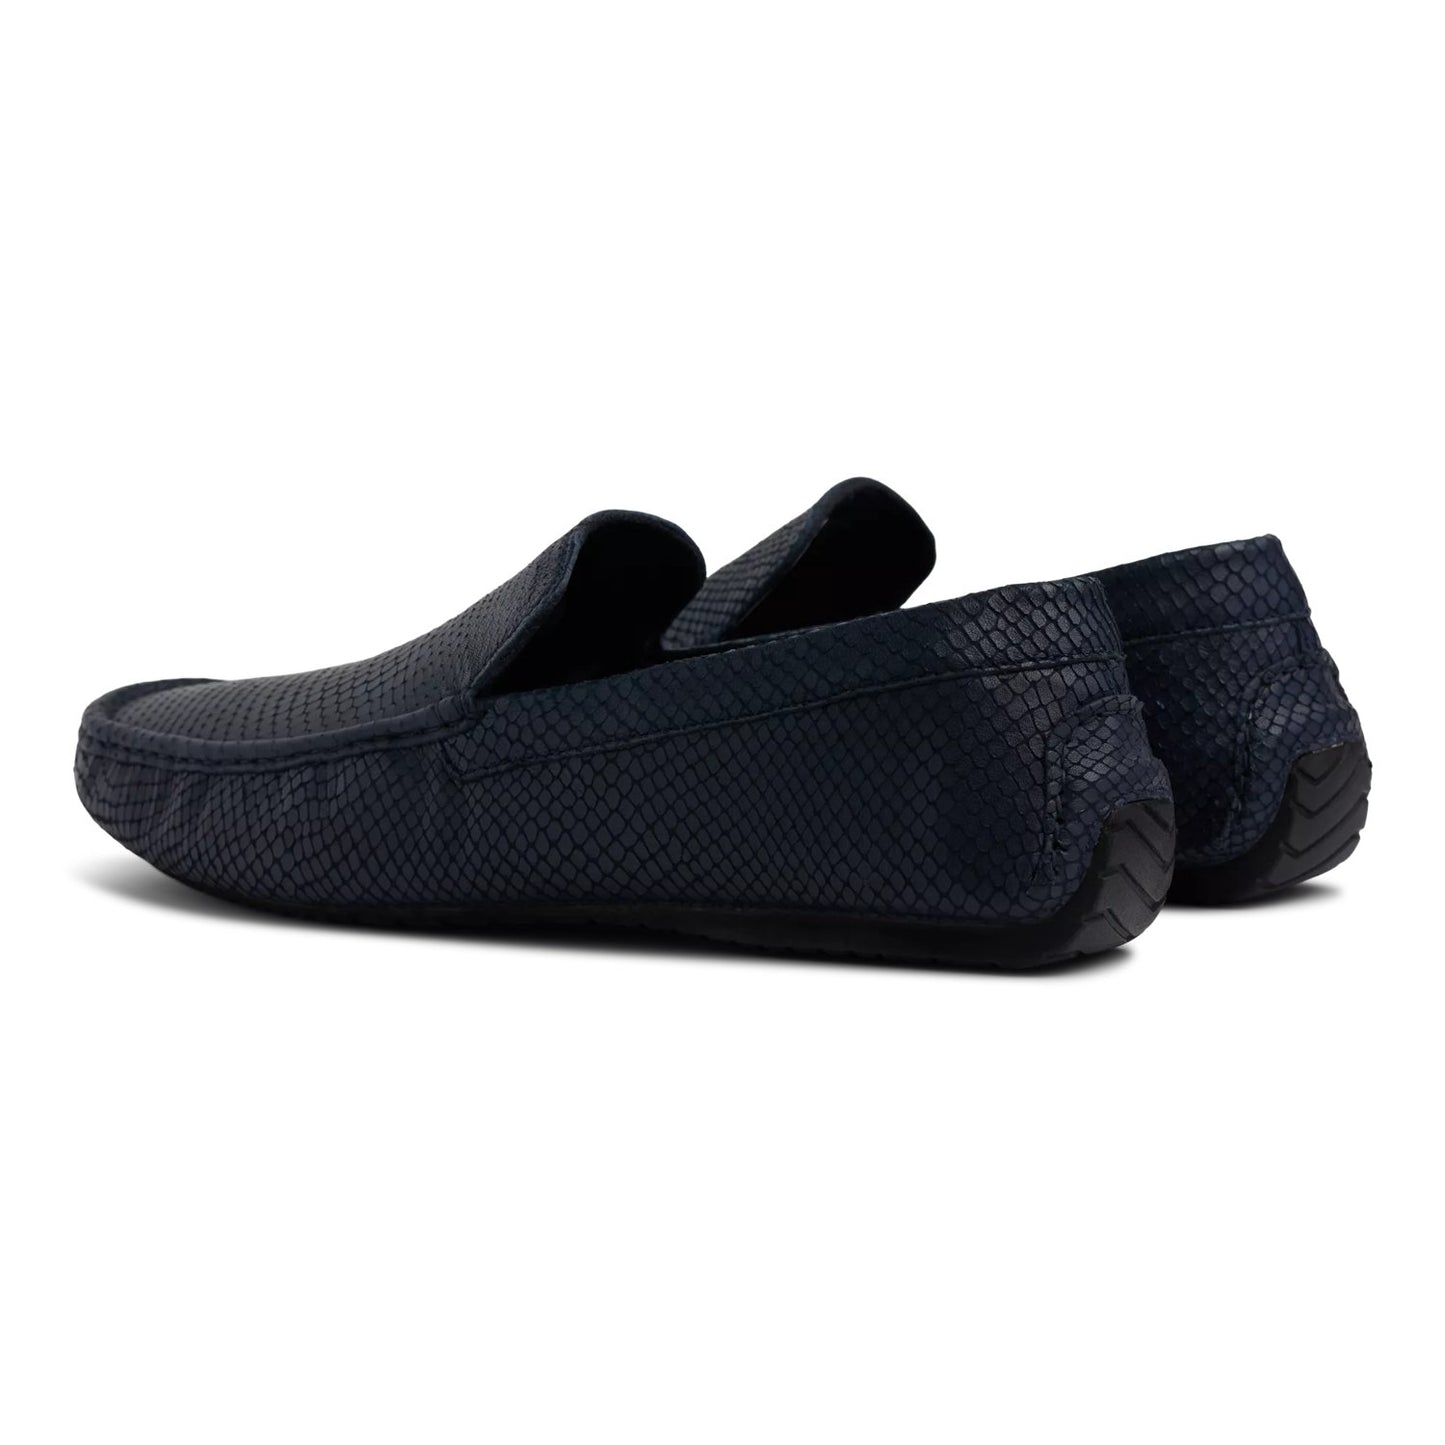 P-Donte Snake Embossed Leather Driving Moccasins